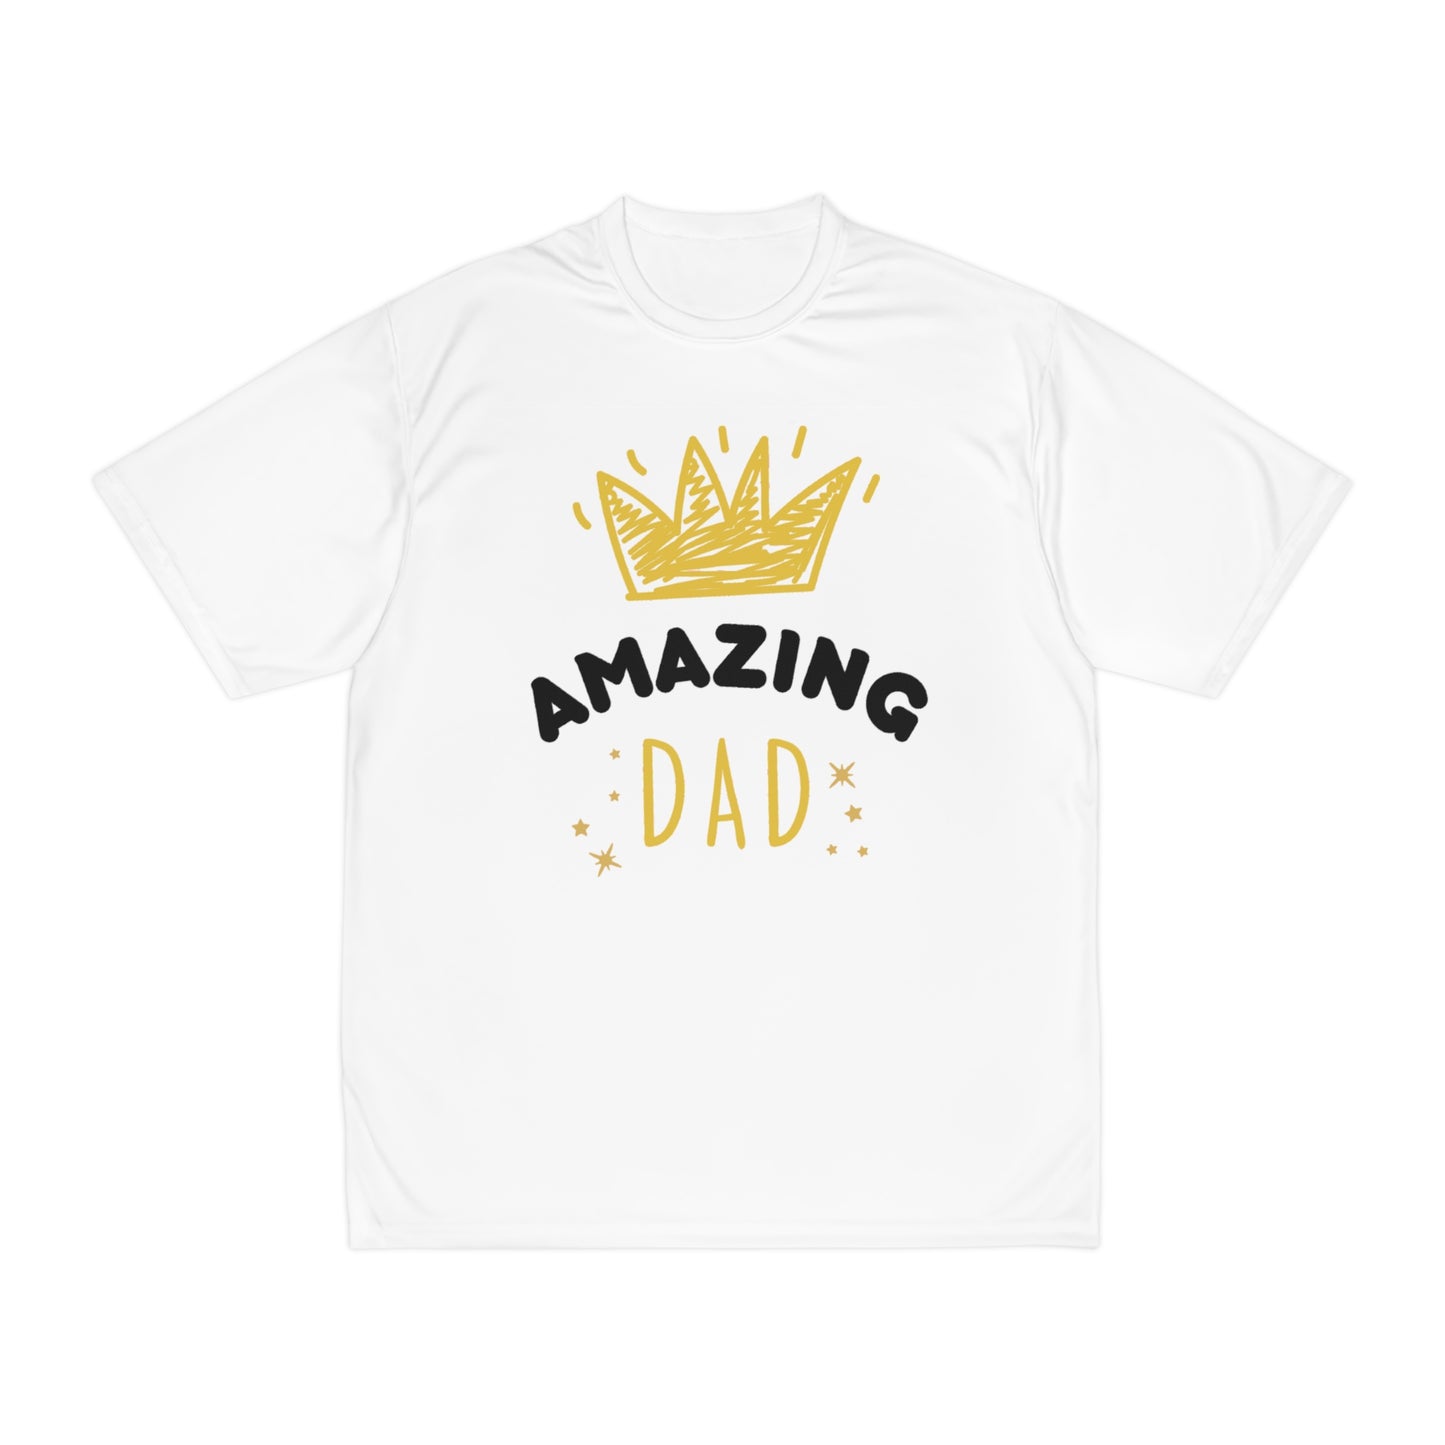 Amazing Dad Men's Performance T-Shirt with Crown Design